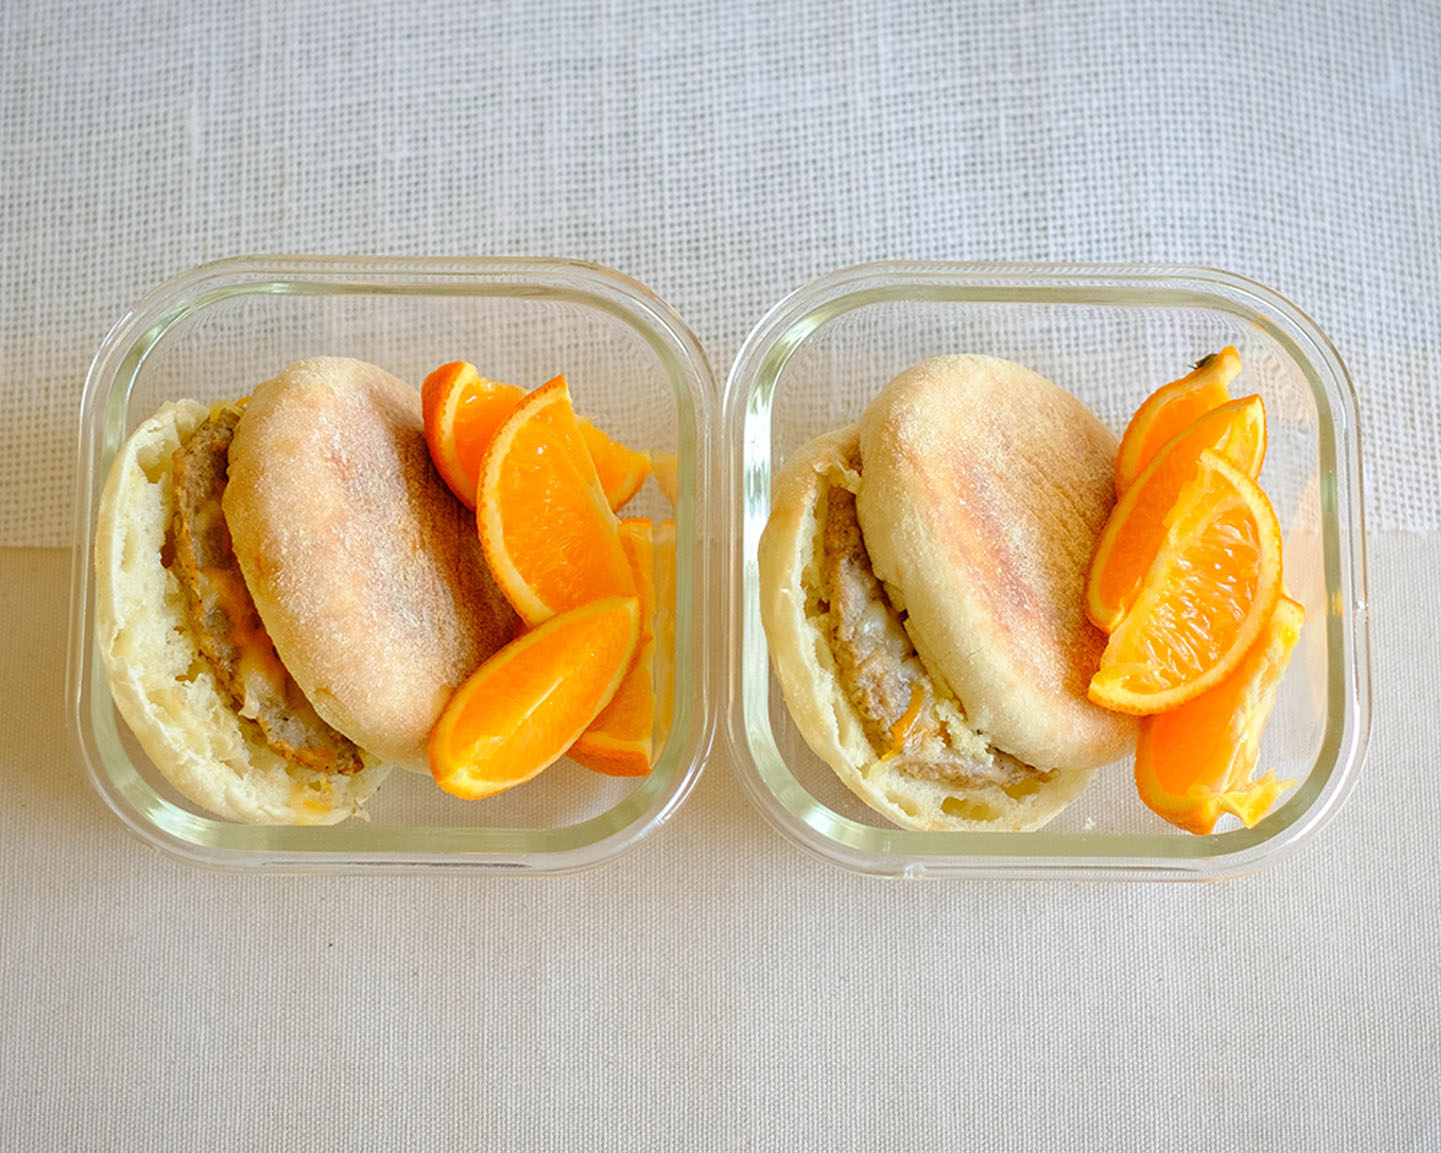 glass meal prep containers with english muffin with a sausage patty, topped with shredded cheese and orange slices.